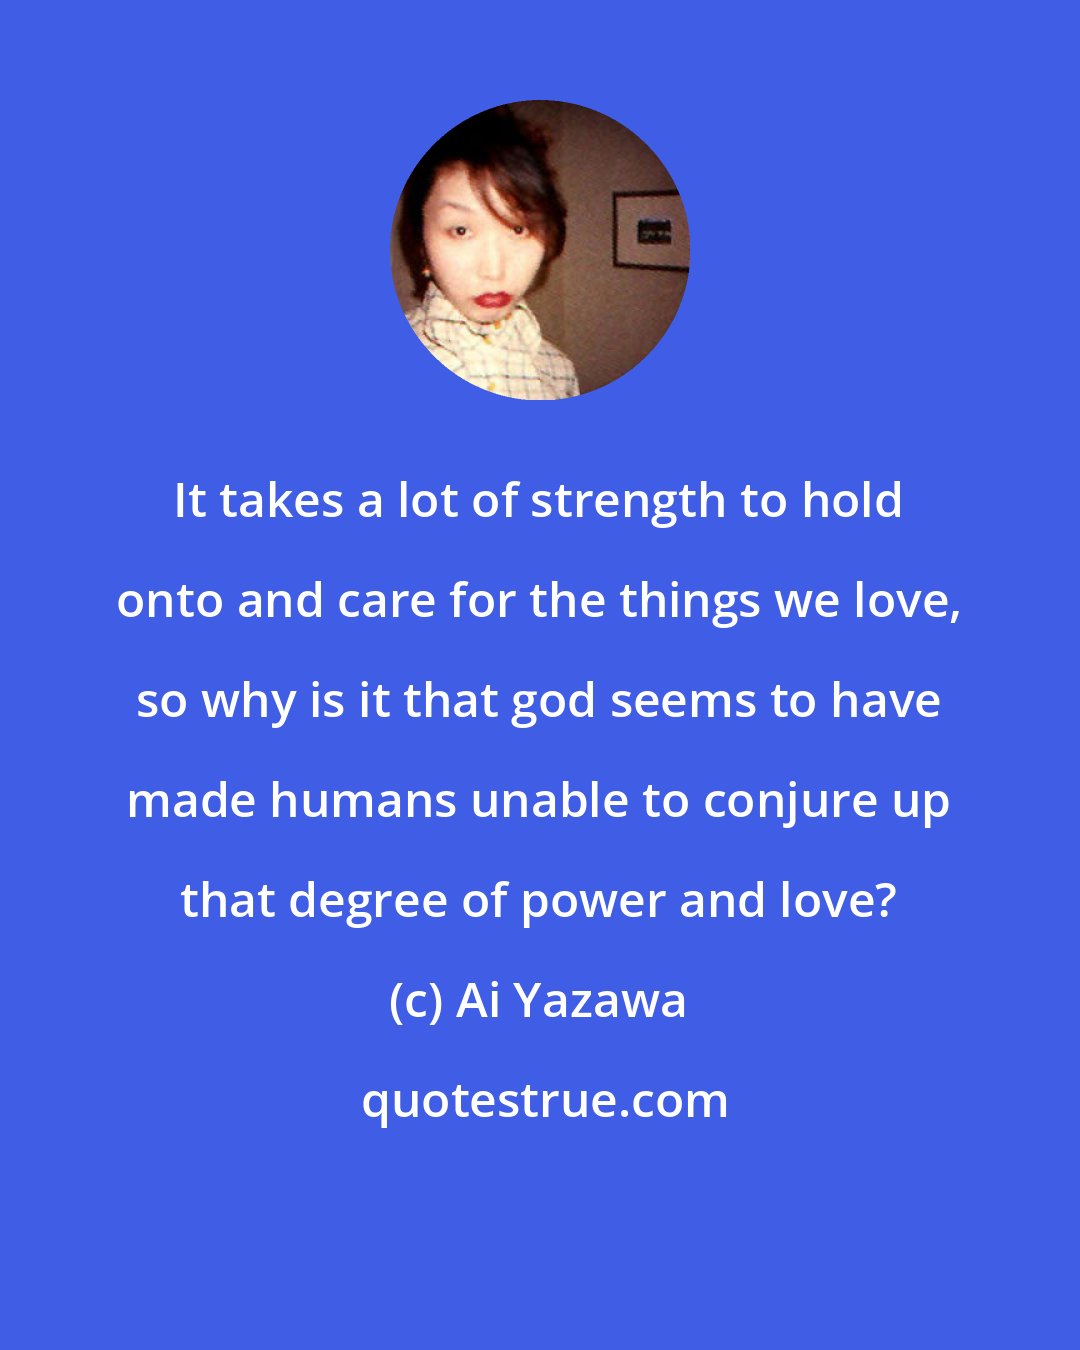 Ai Yazawa: It takes a lot of strength to hold onto and care for the things we love, so why is it that god seems to have made humans unable to conjure up that degree of power and love?